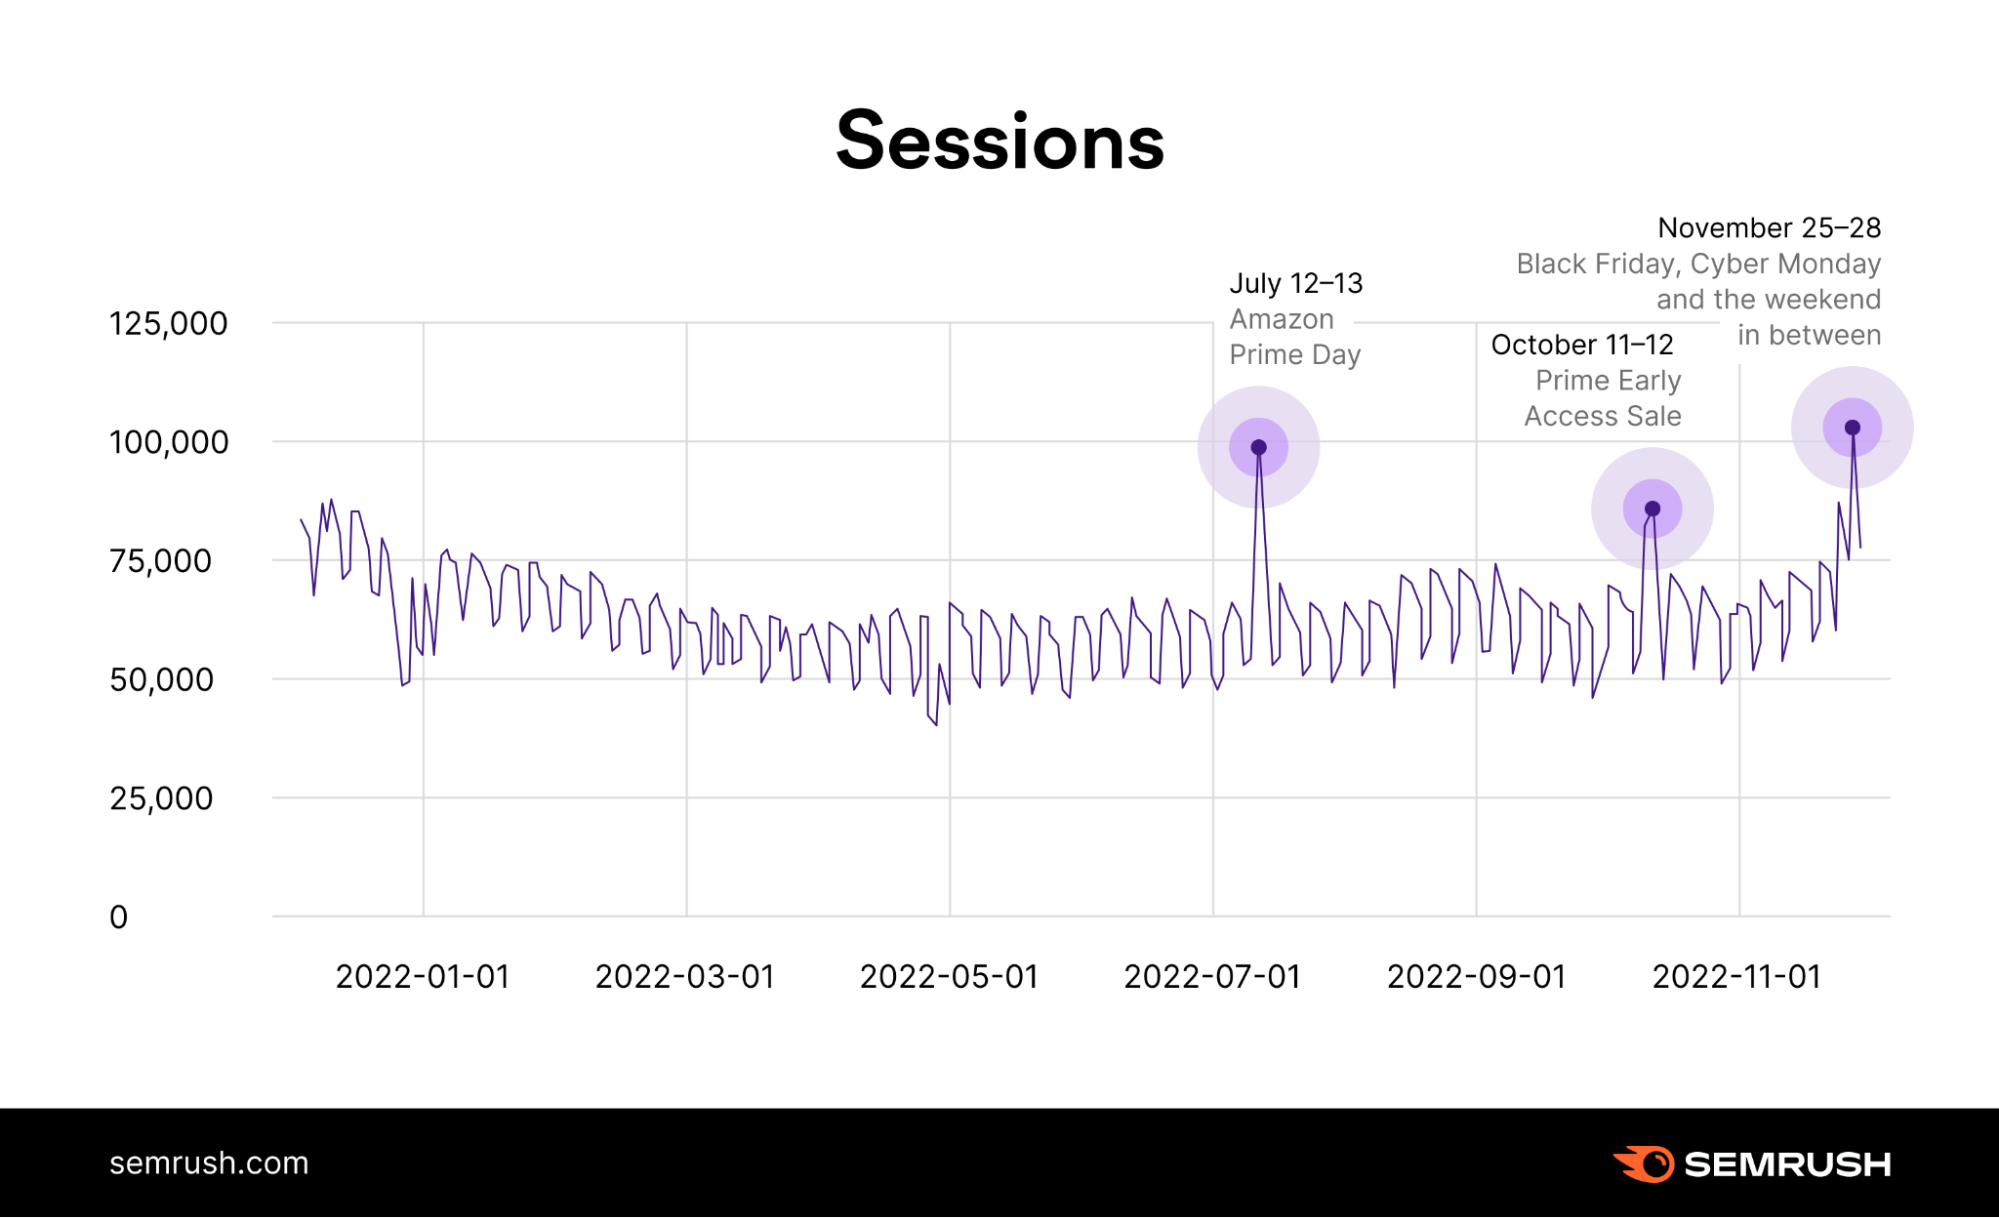 The trend for number of users sessions per day on Amazon in 2022. The highest spikes occurred on Prime Day (July 12-13), the Prime Early Access Sale (October 11-12), and Black Friday weekend (November 25-28).